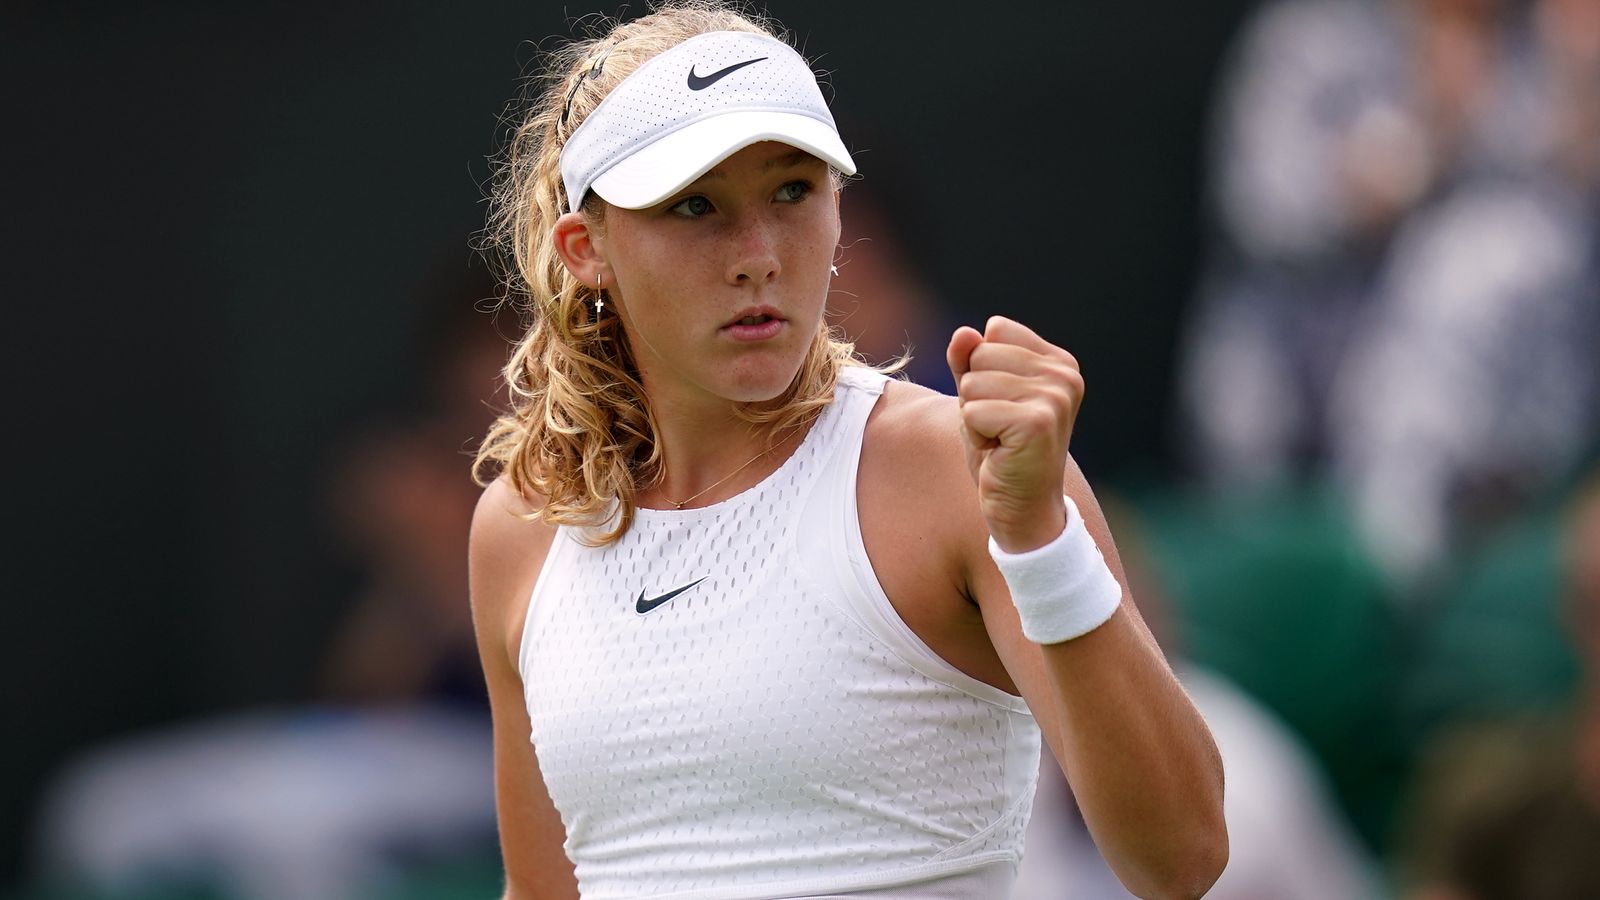 Wimbledon: Teenager Mirra Andreeva continues her dream run by reaching fourth round | Tennis News